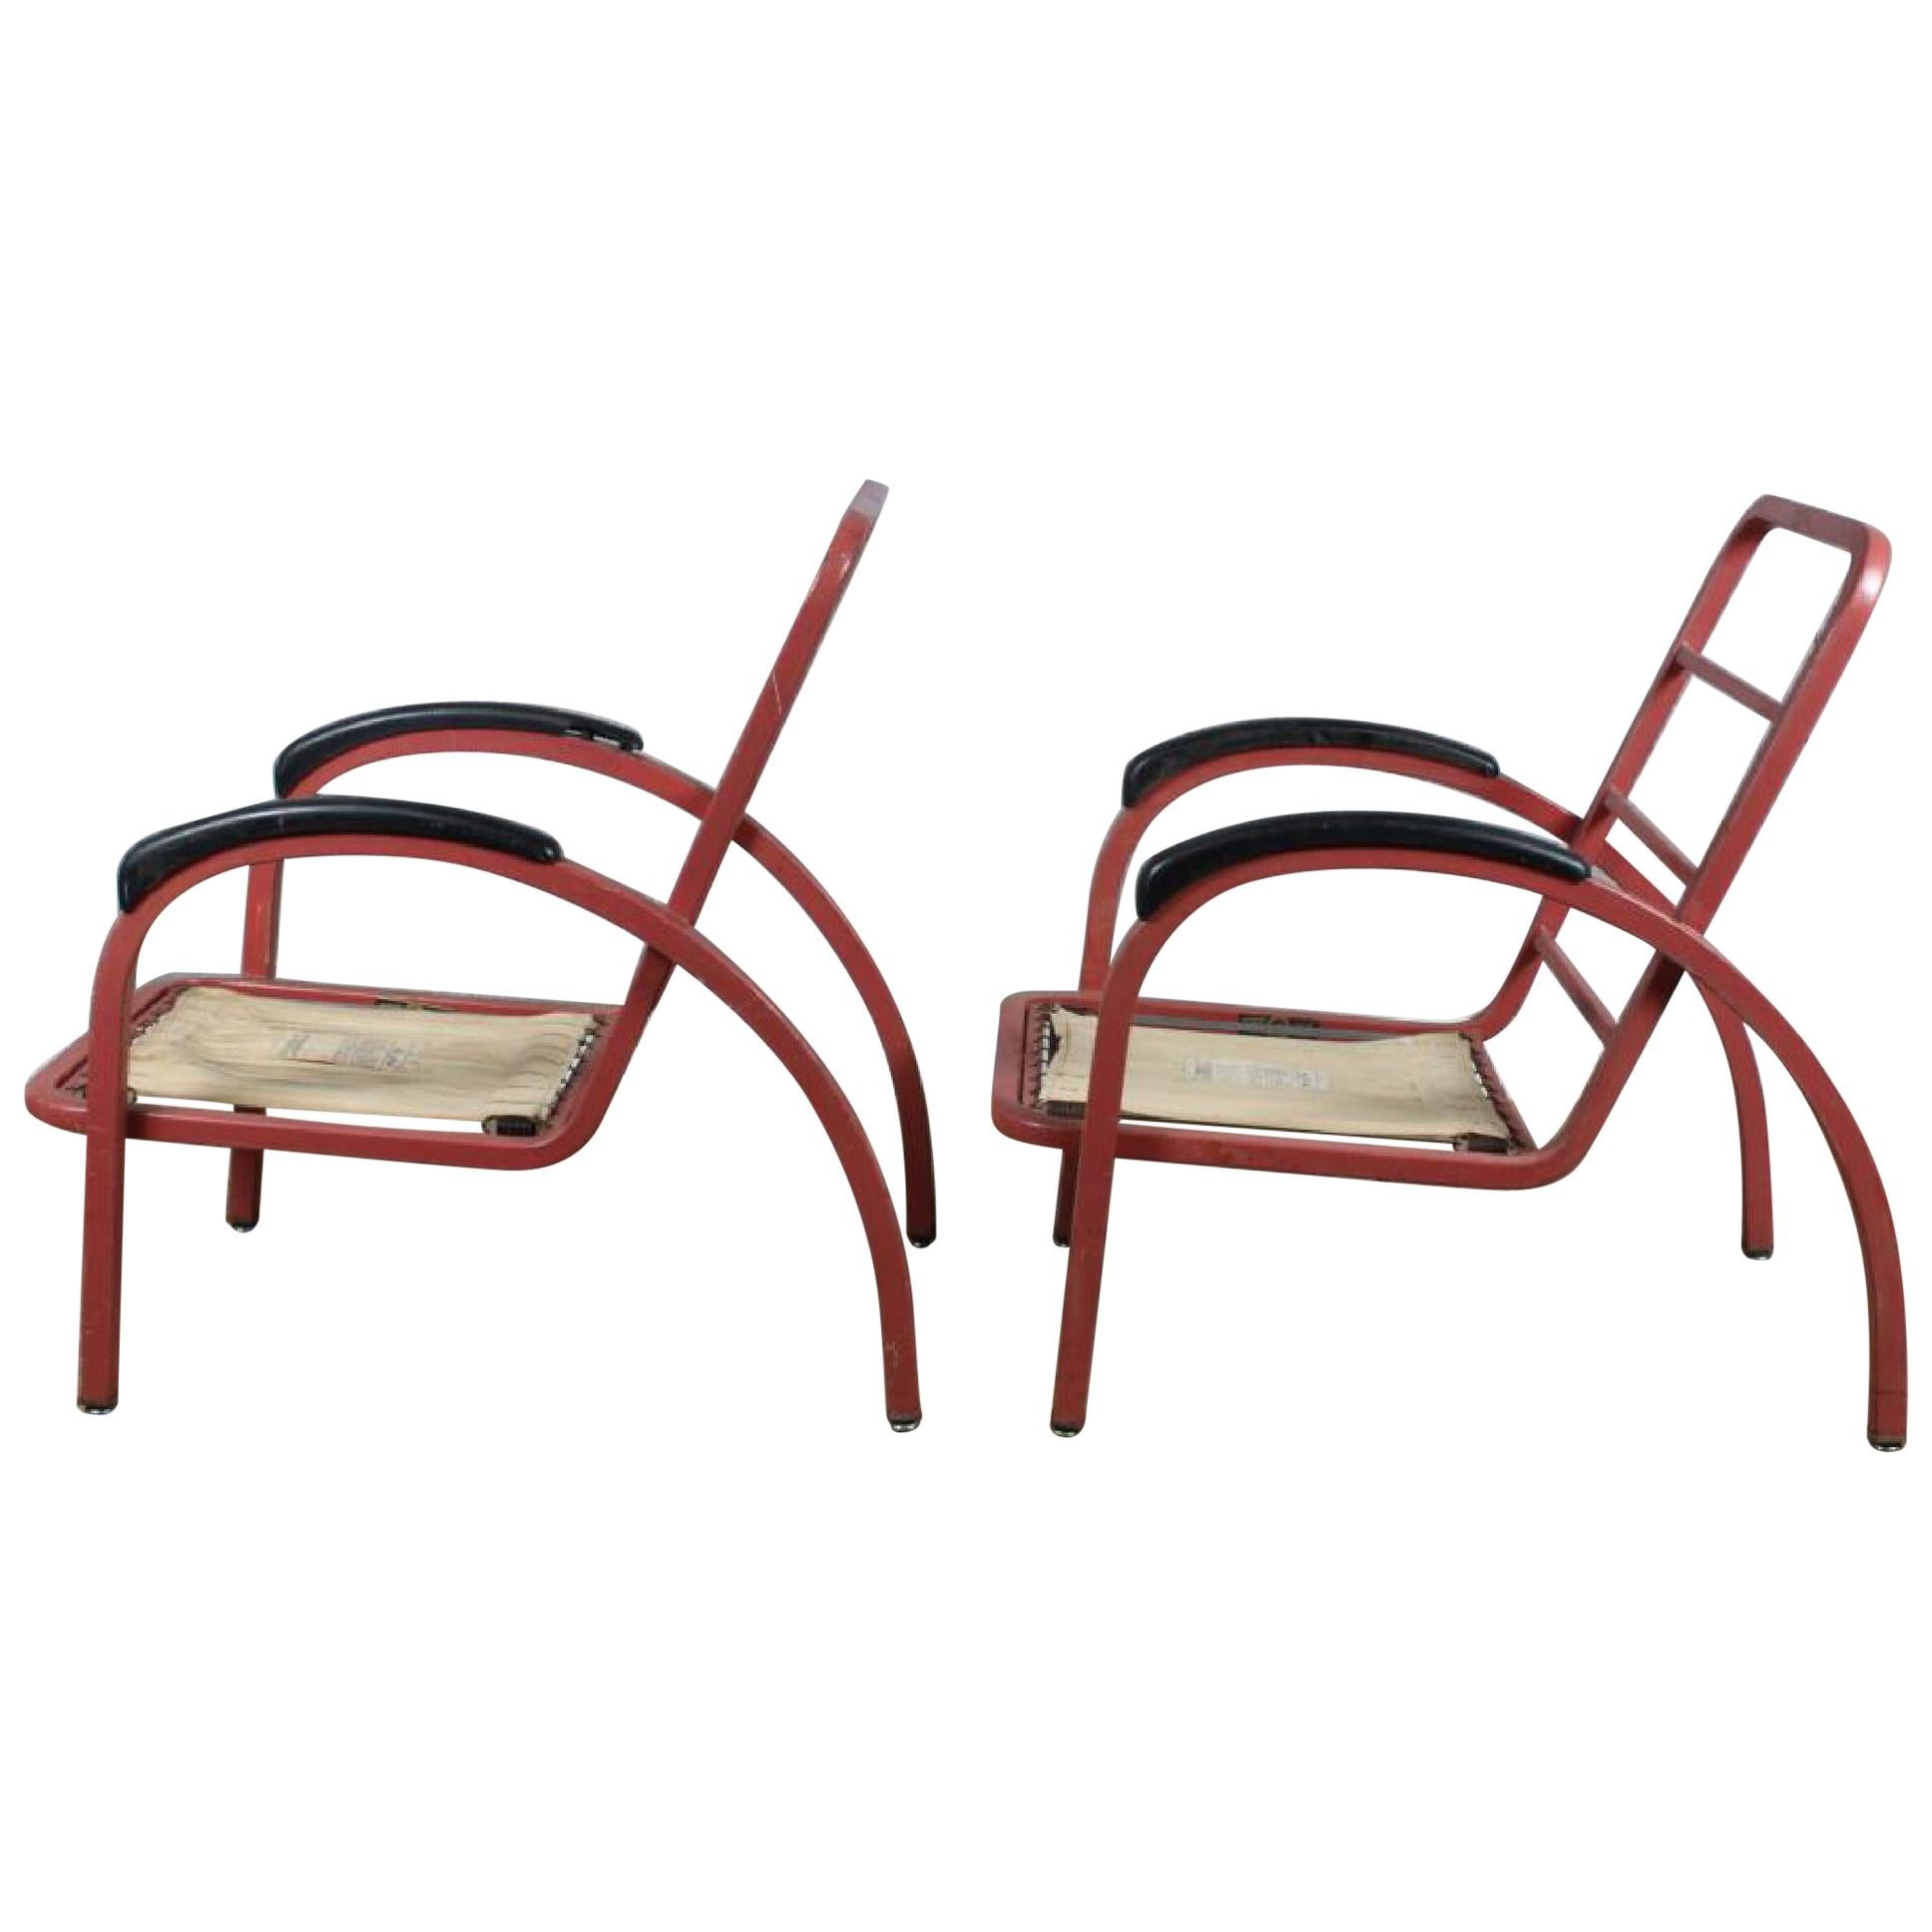 Art Deco Streamline Moderne Metal Lounge Chairs Norman Bel Geddes Simmons Red